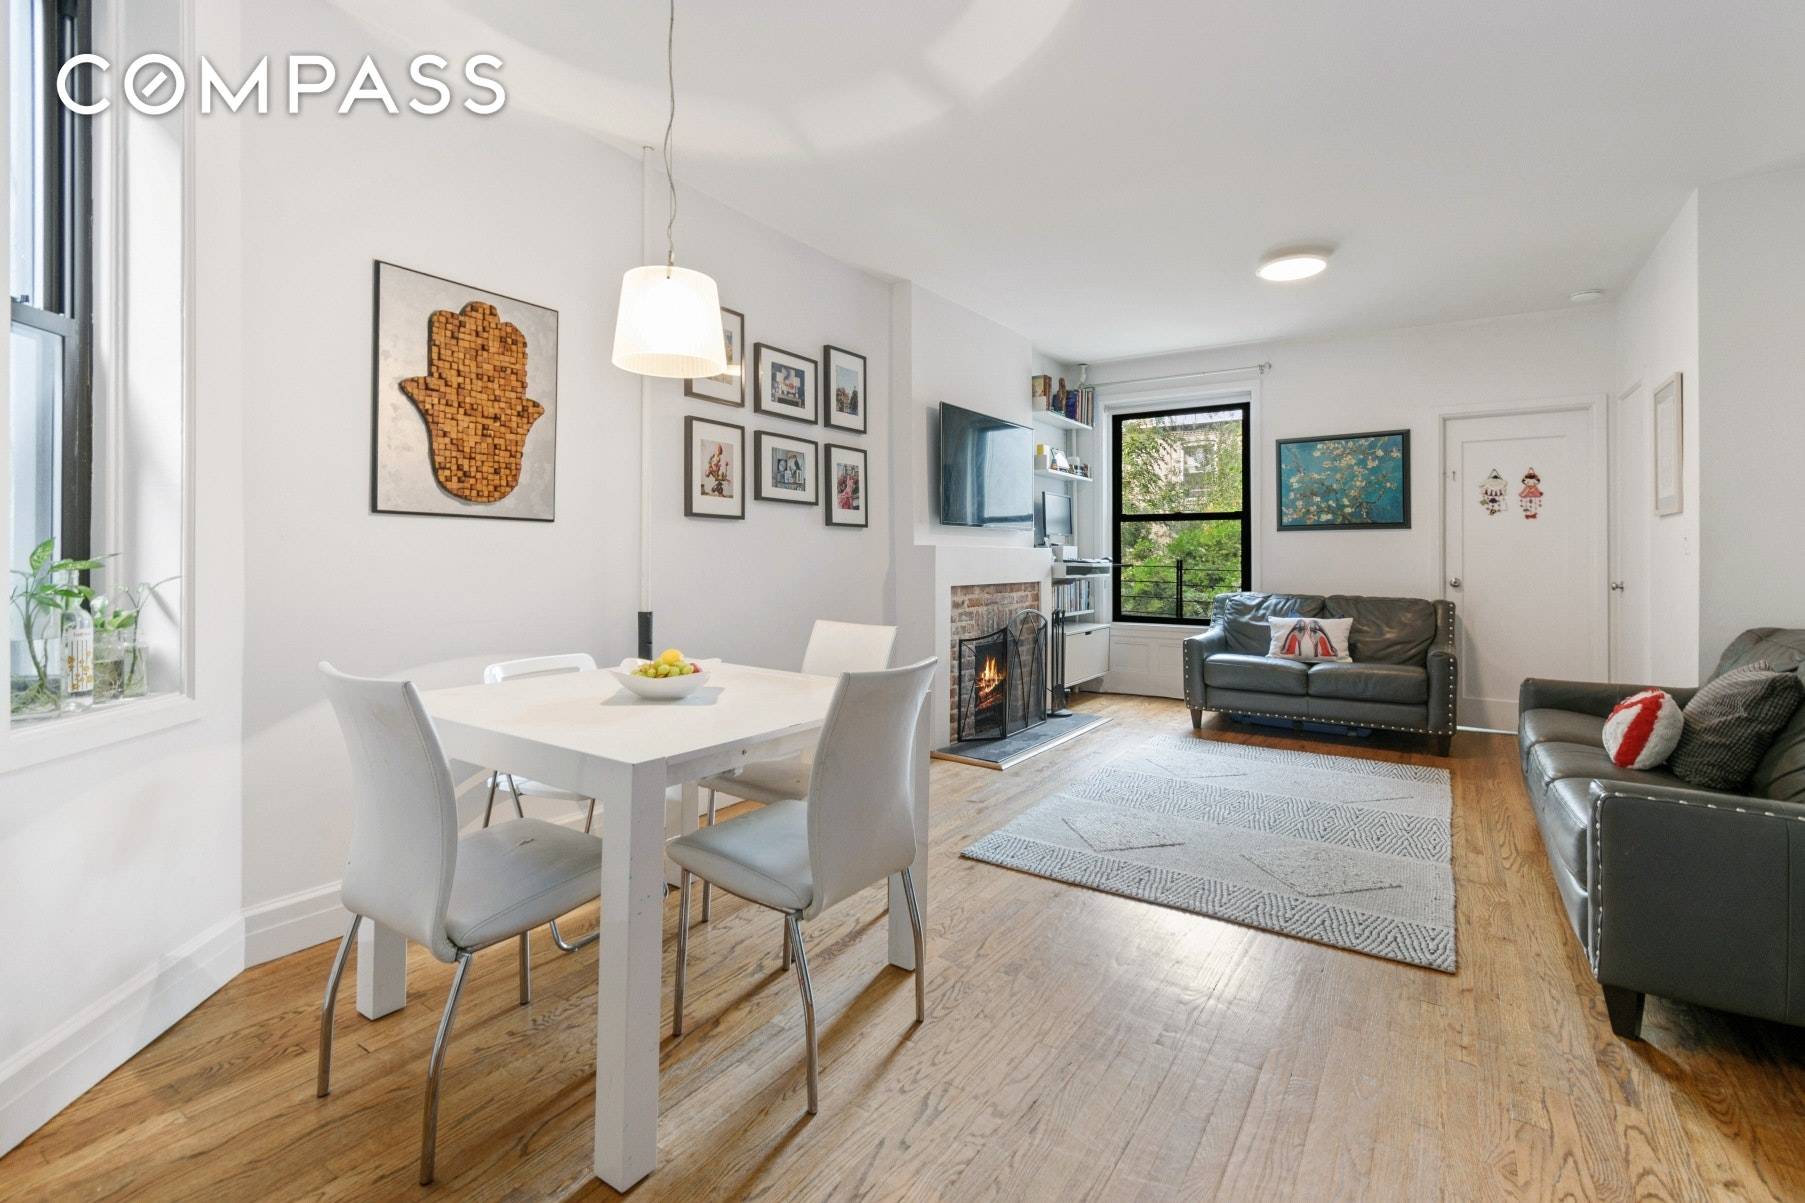 New to market beautiful two bedroom co op in prime Carroll Gardens.